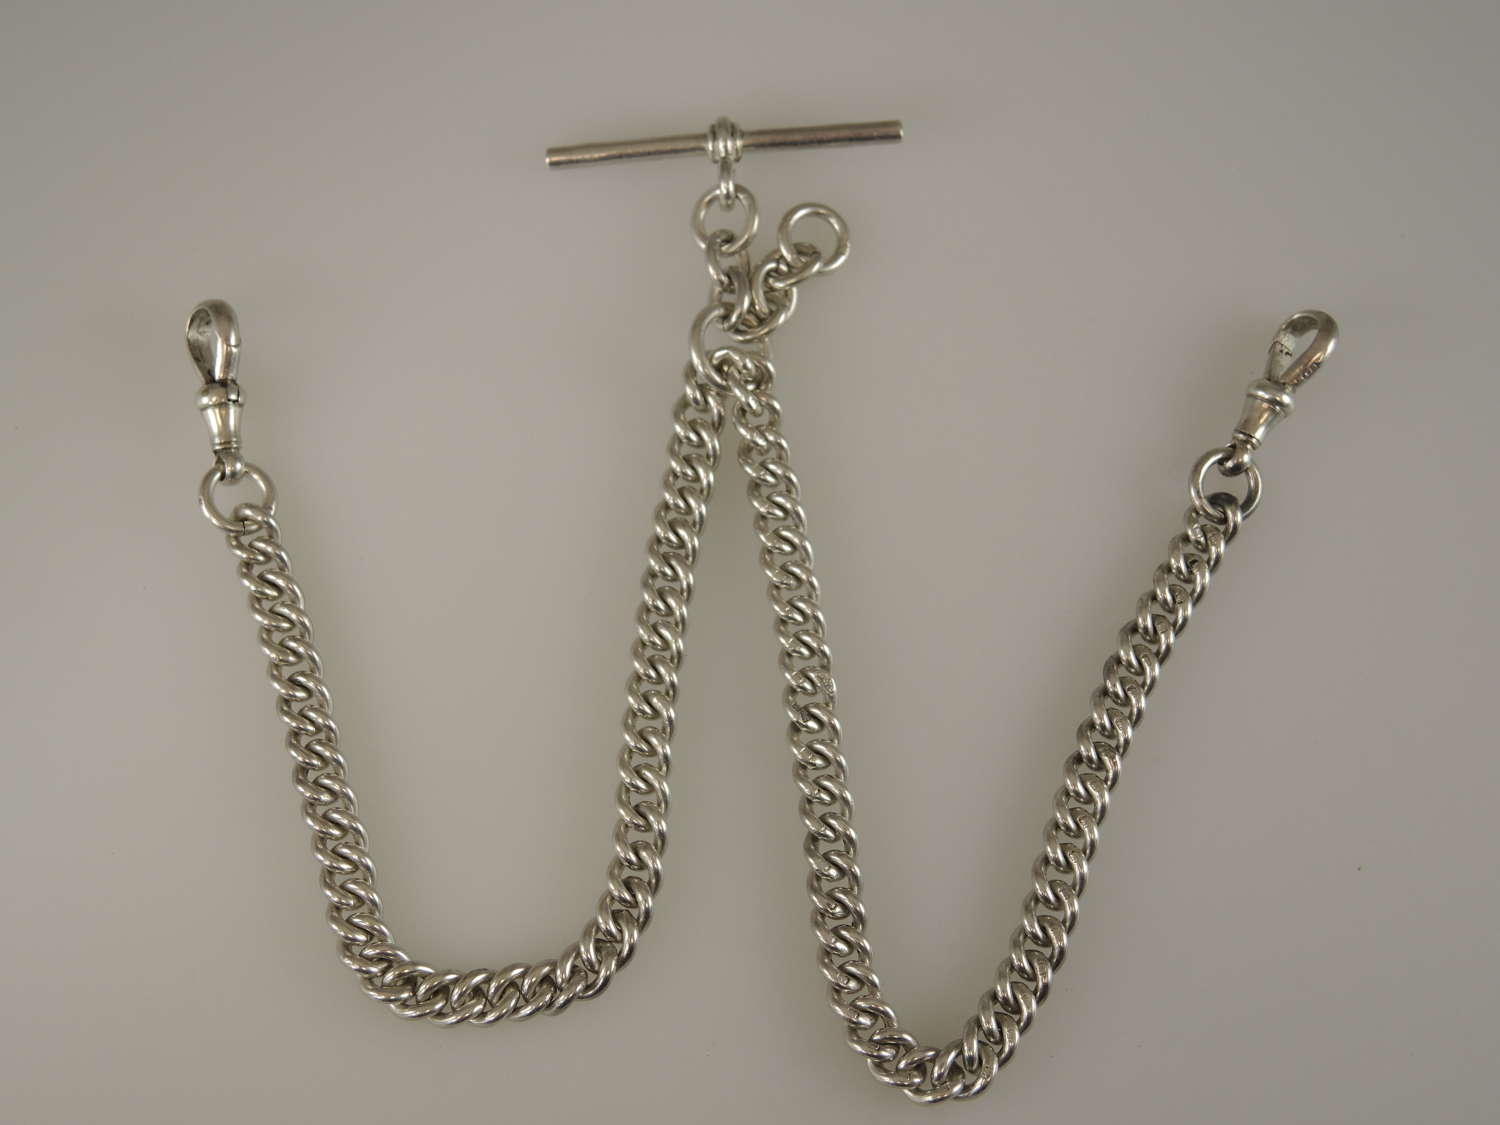 Top quality English silver double or single watch chain c1923